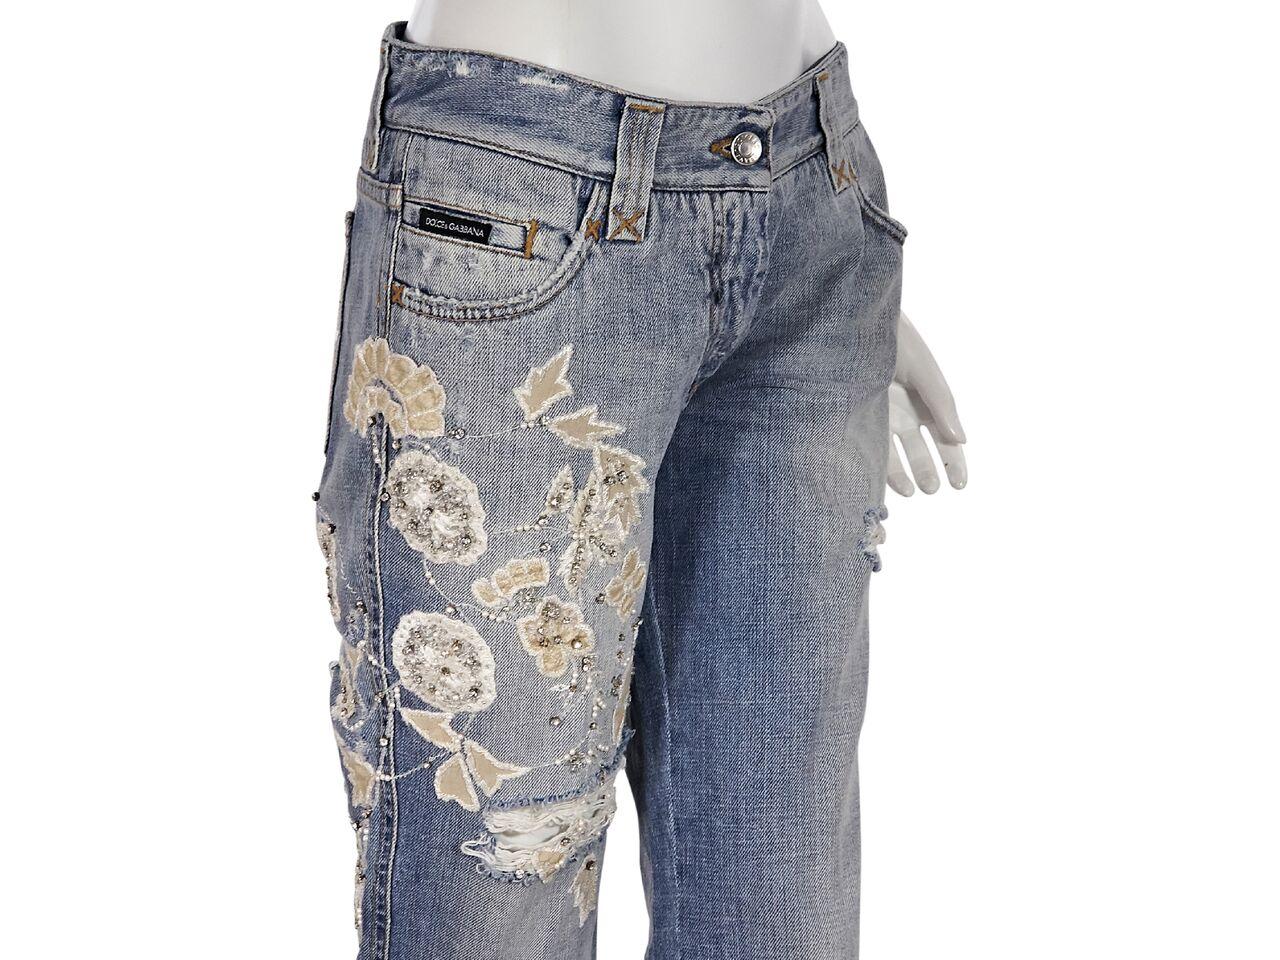 Product details:  Light wash distressed jeans by Dolce & Gabbana.  Embellished with crystals and floral applique.  Five-pocket design.  Looped waist.  Button and zip fly closure.  32.5